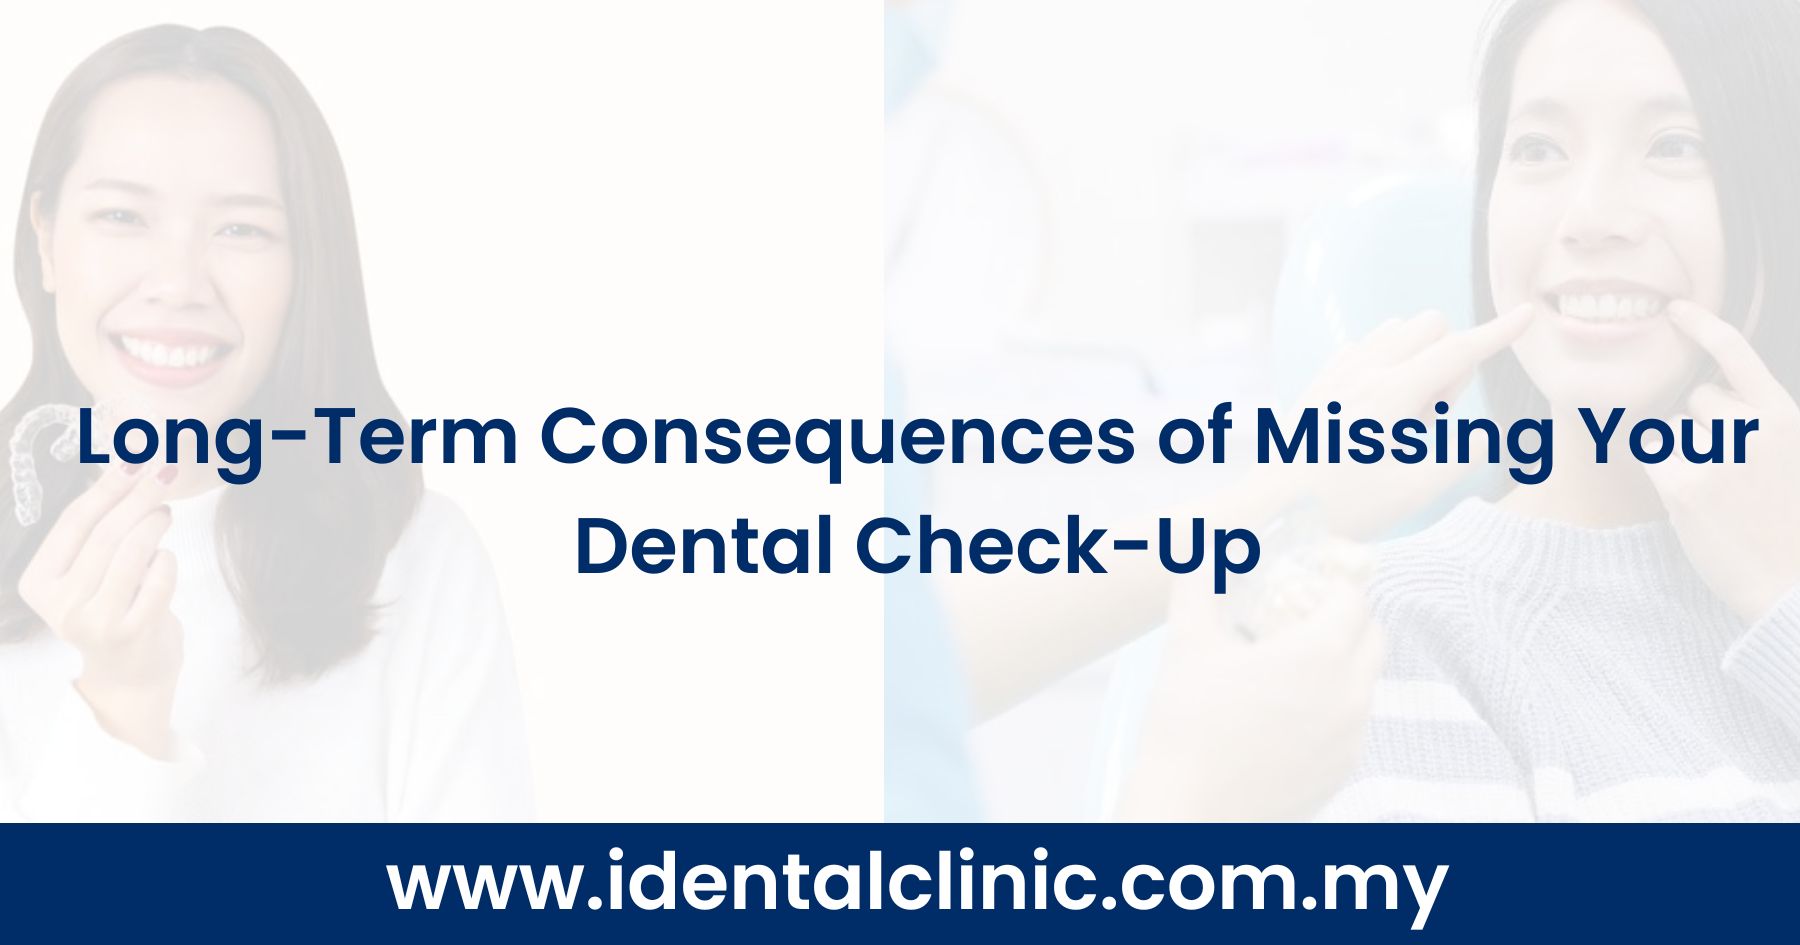 Long-Term Consequences of Missing Your Dental Check-Up